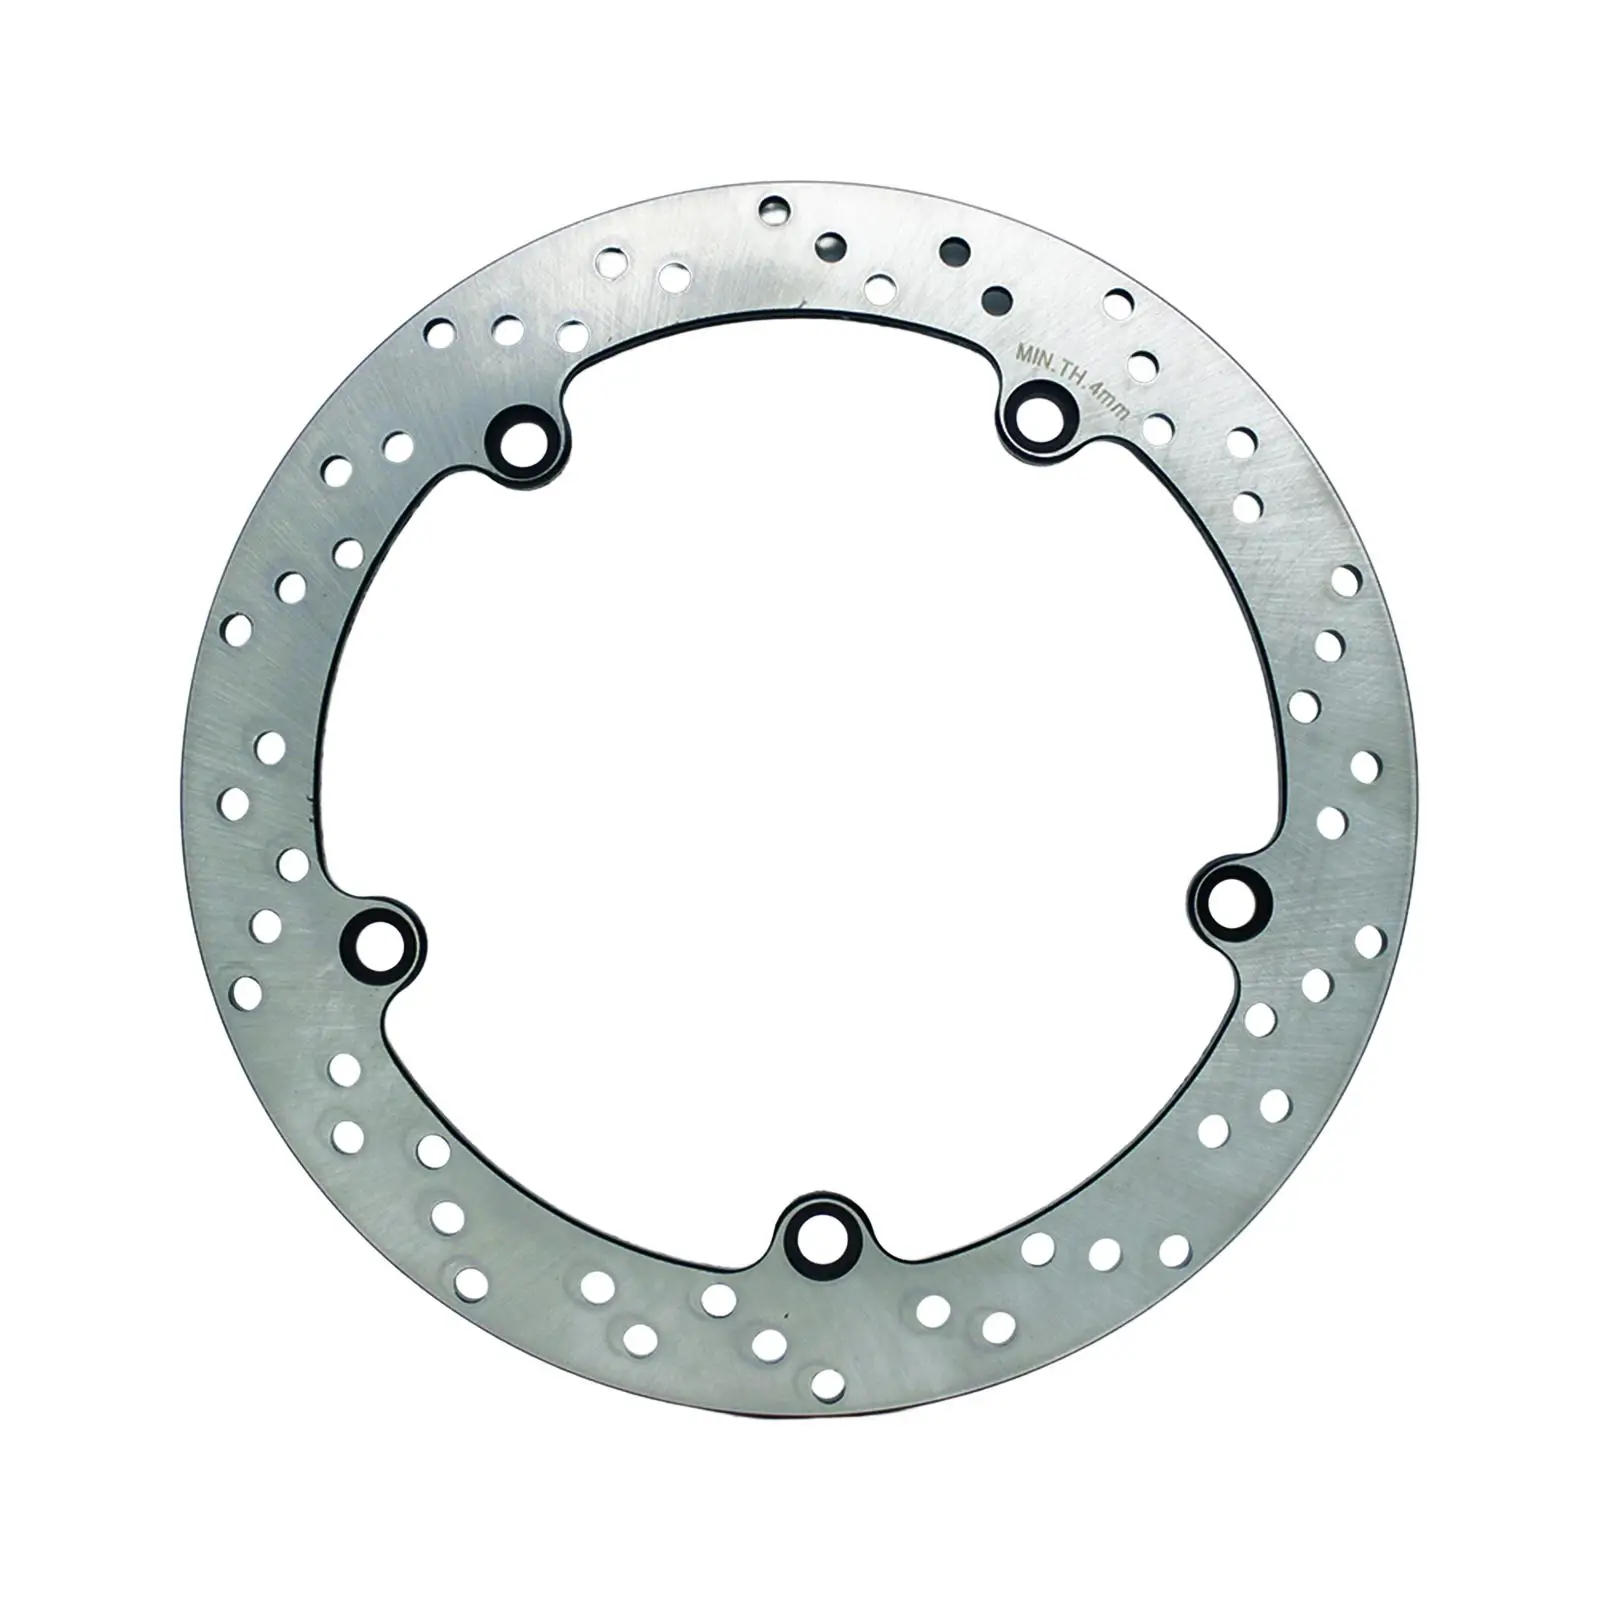 Motorcycle Rear Brake Disc Professional Spare Part Accessory for R1100RT R1100S